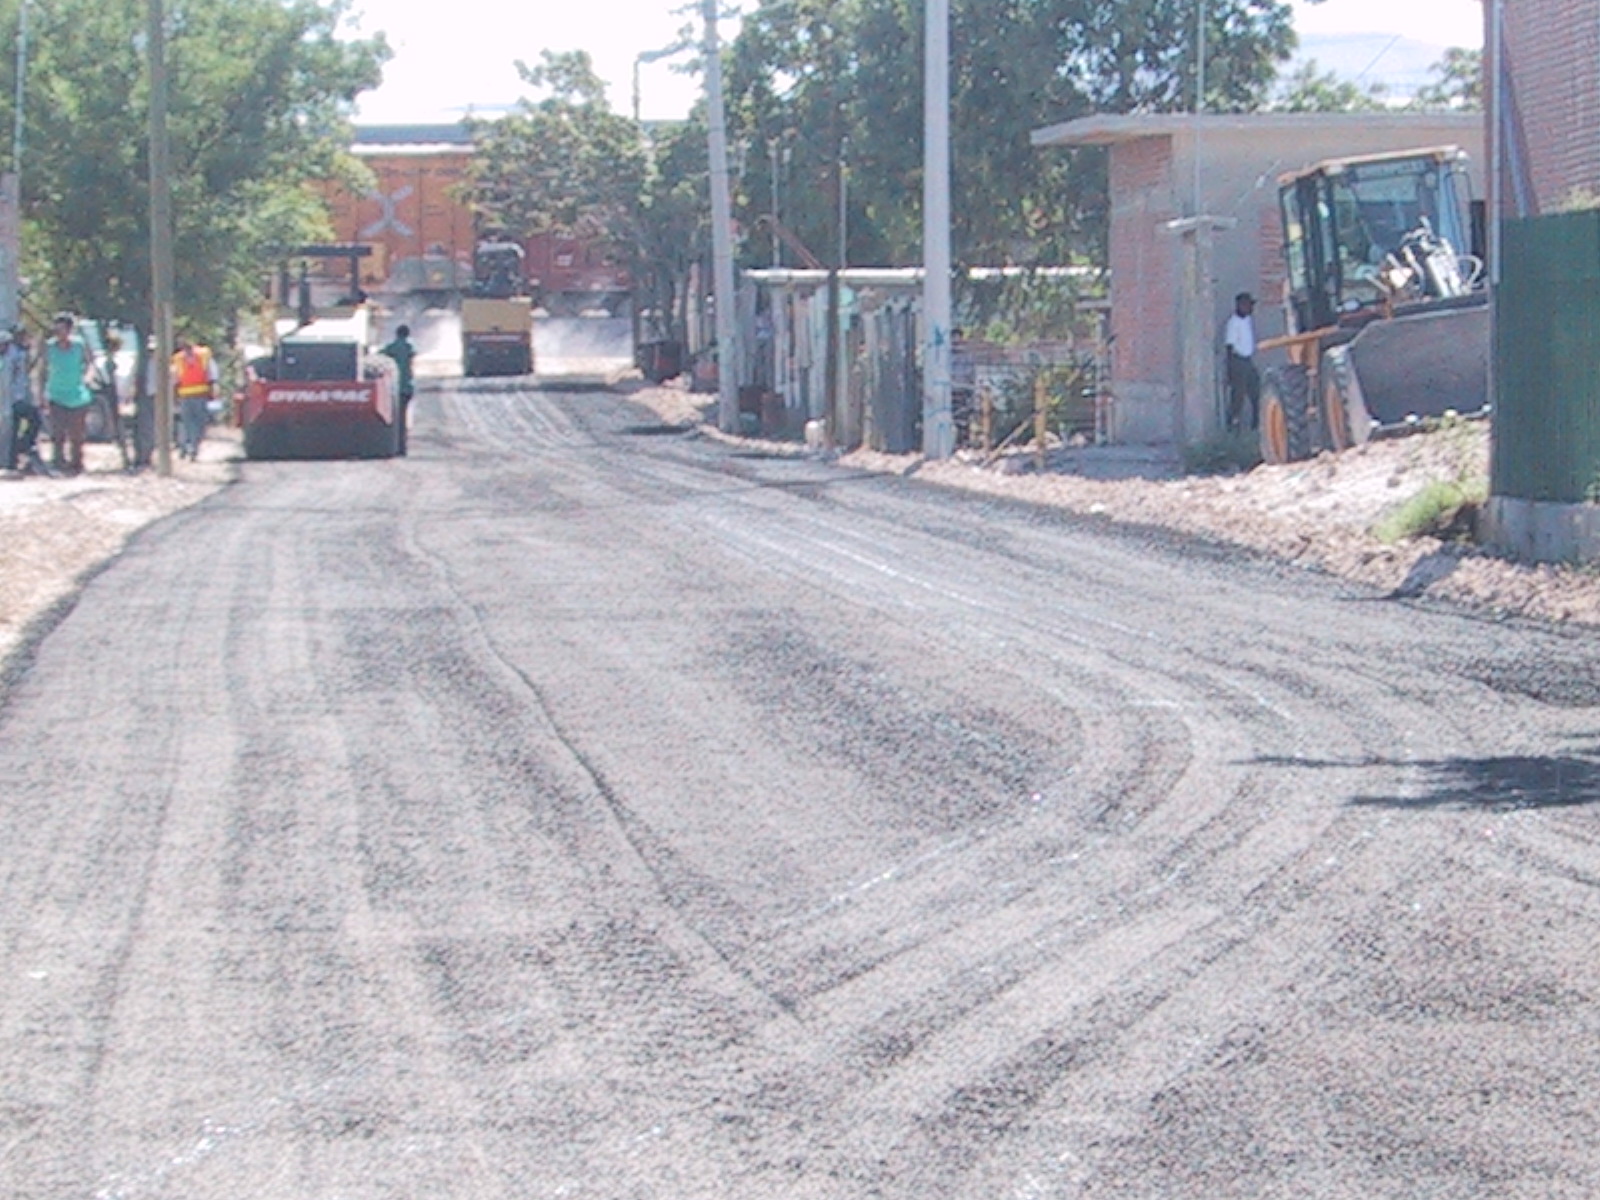 Tires Used in Pilot Rubber Pavement Project